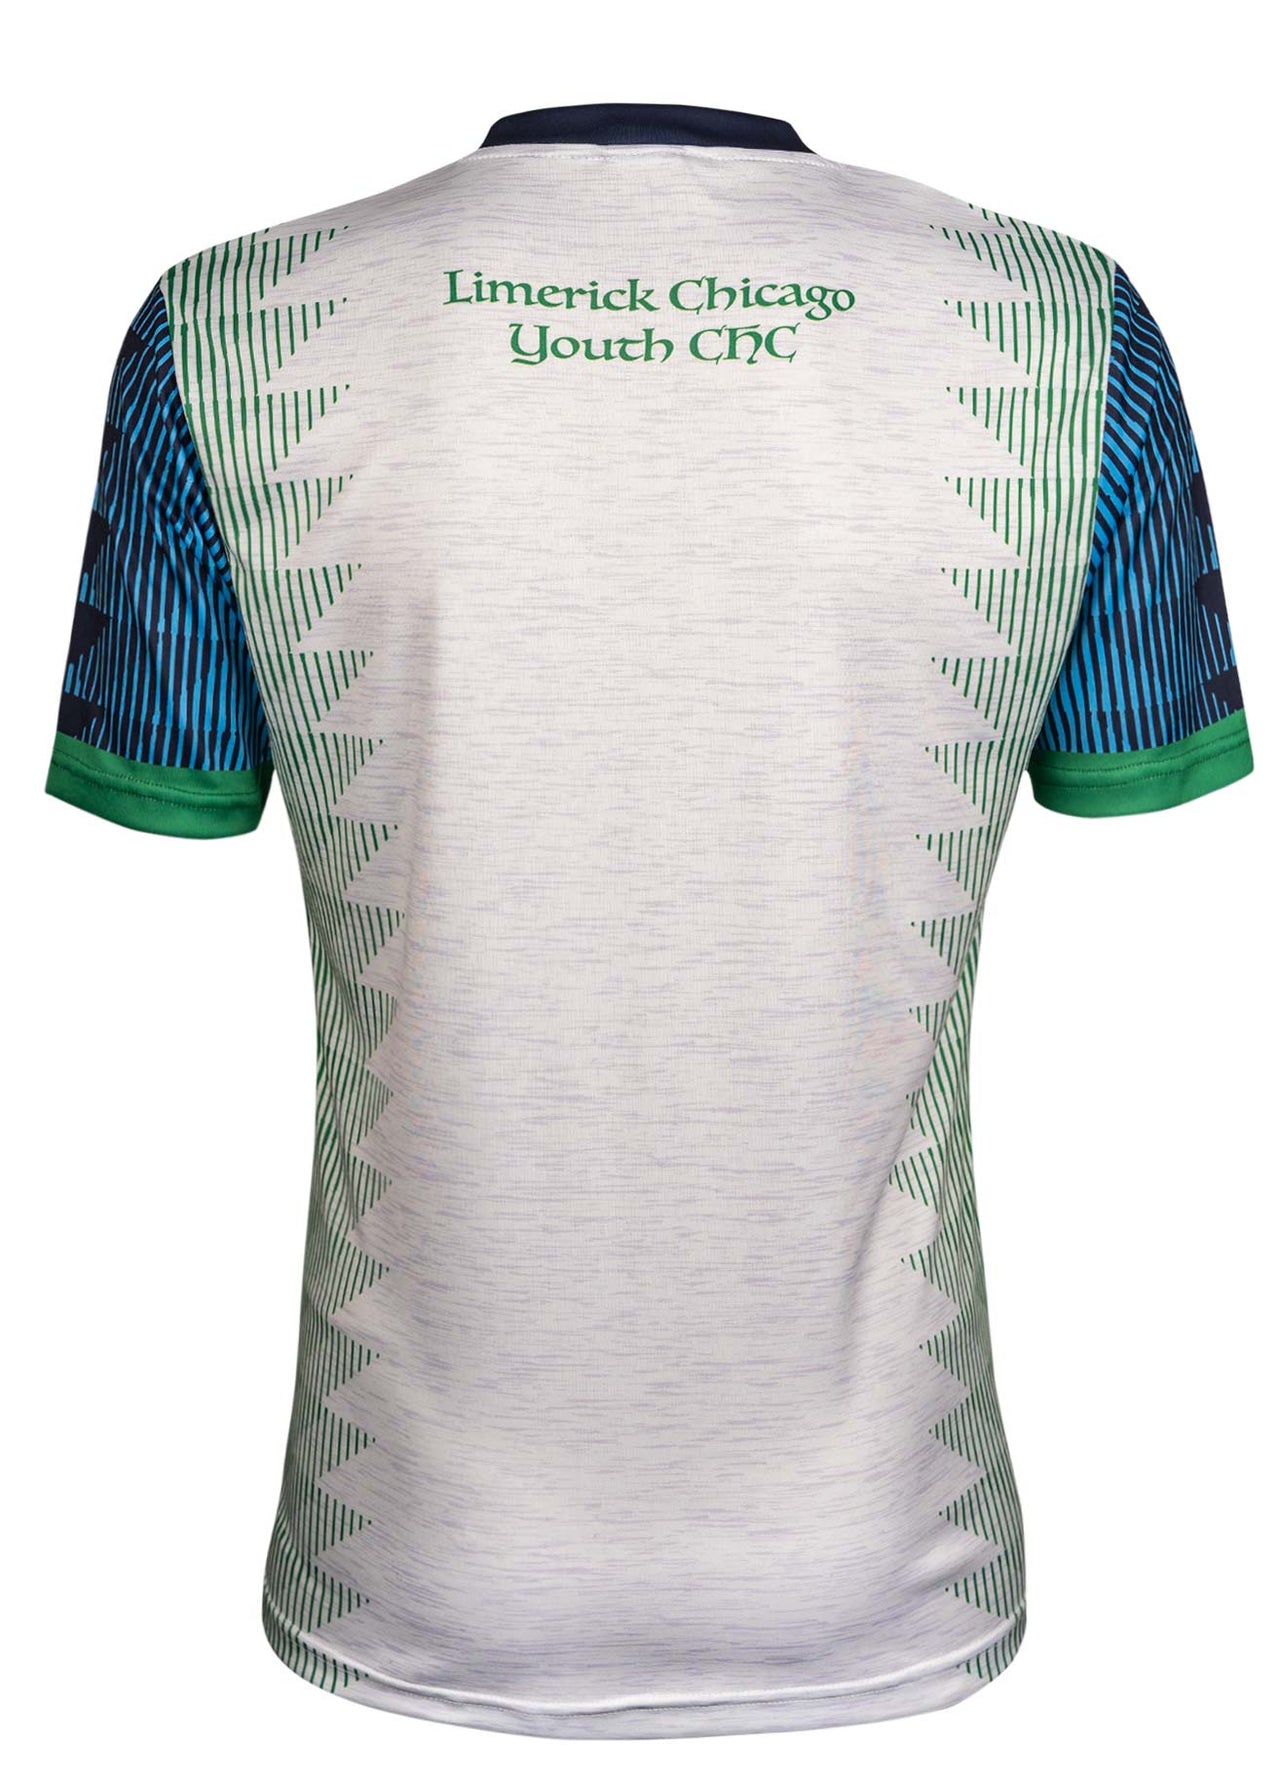 Limerick Chicago Youth Training Jersey Player Fit Adult